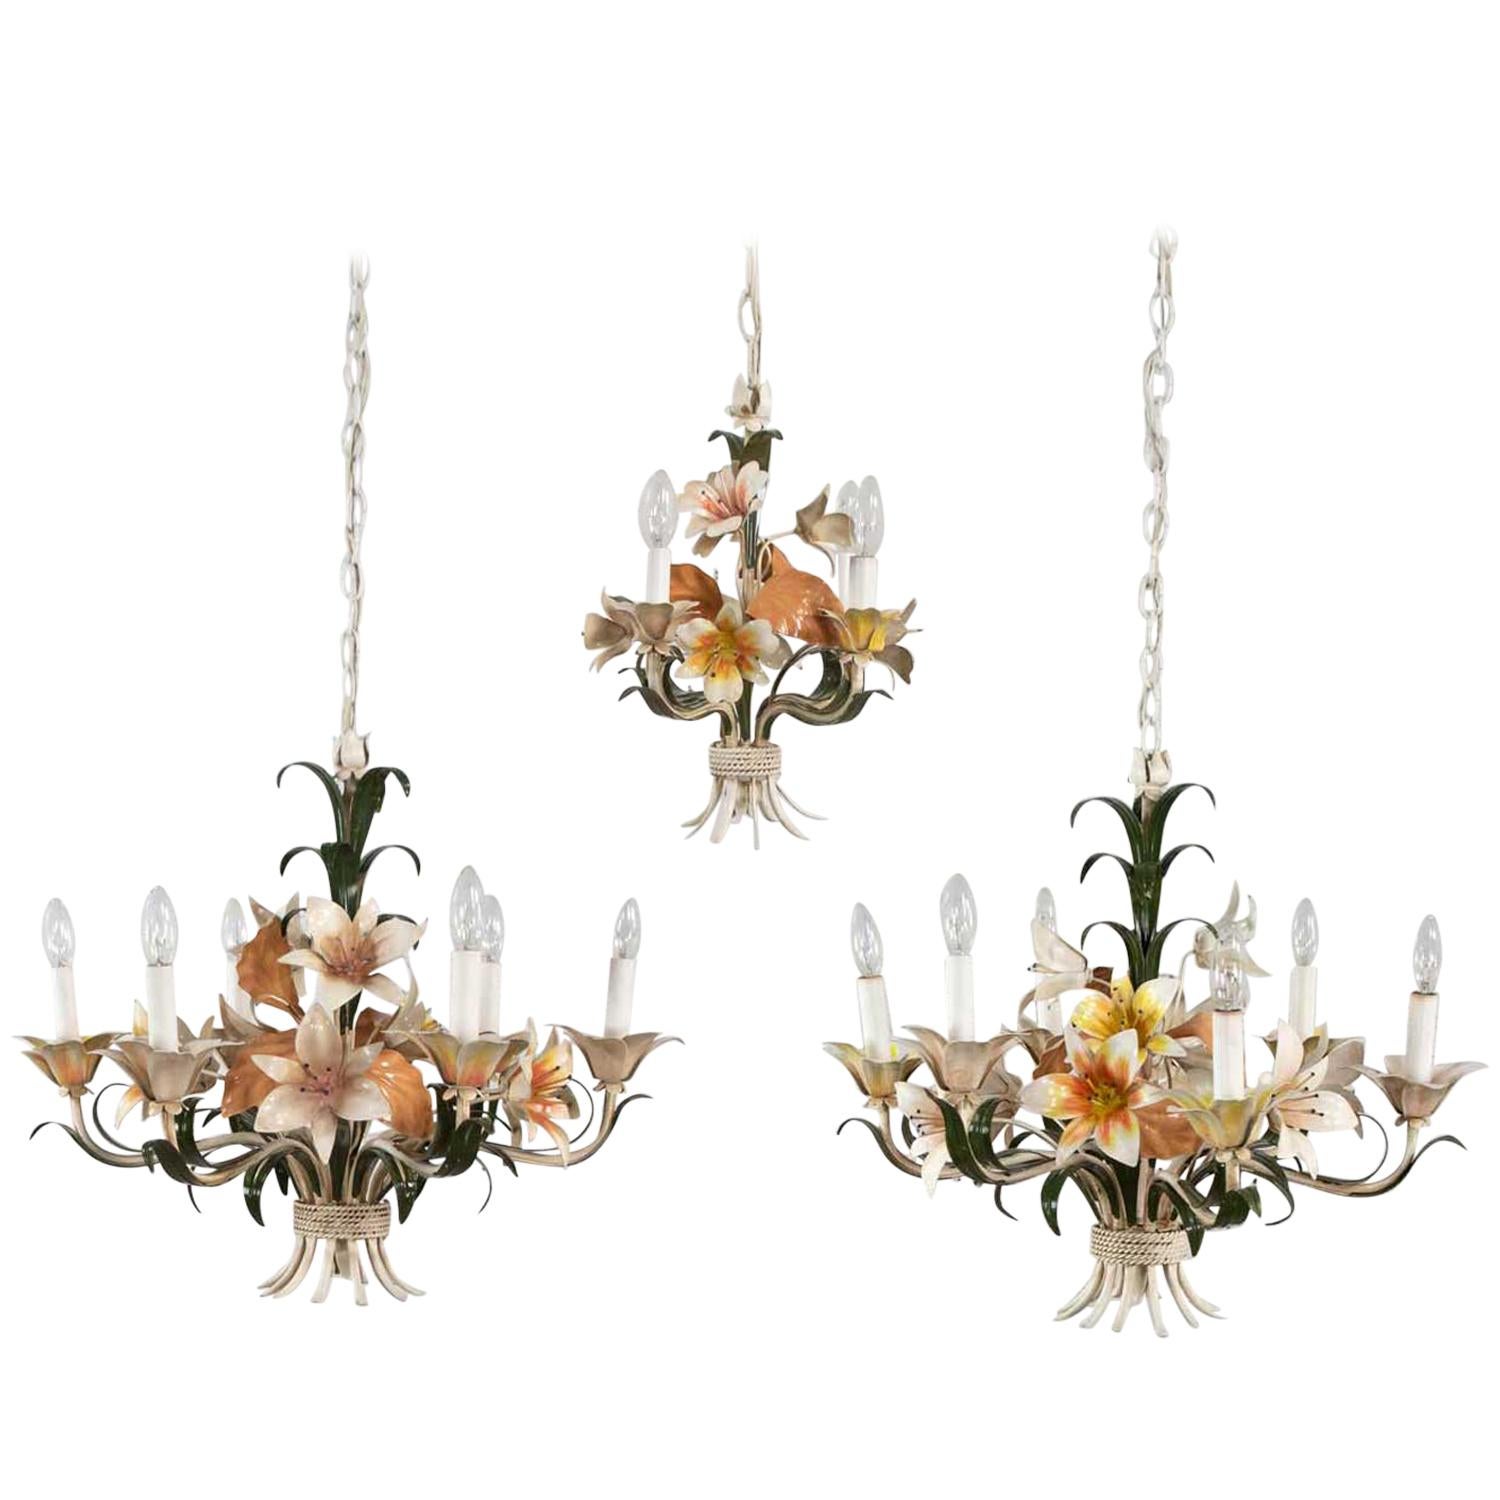 Trio Vintage Tole Painted Floral Chandeliers 2 with 6-Light and 1 with 3-Light